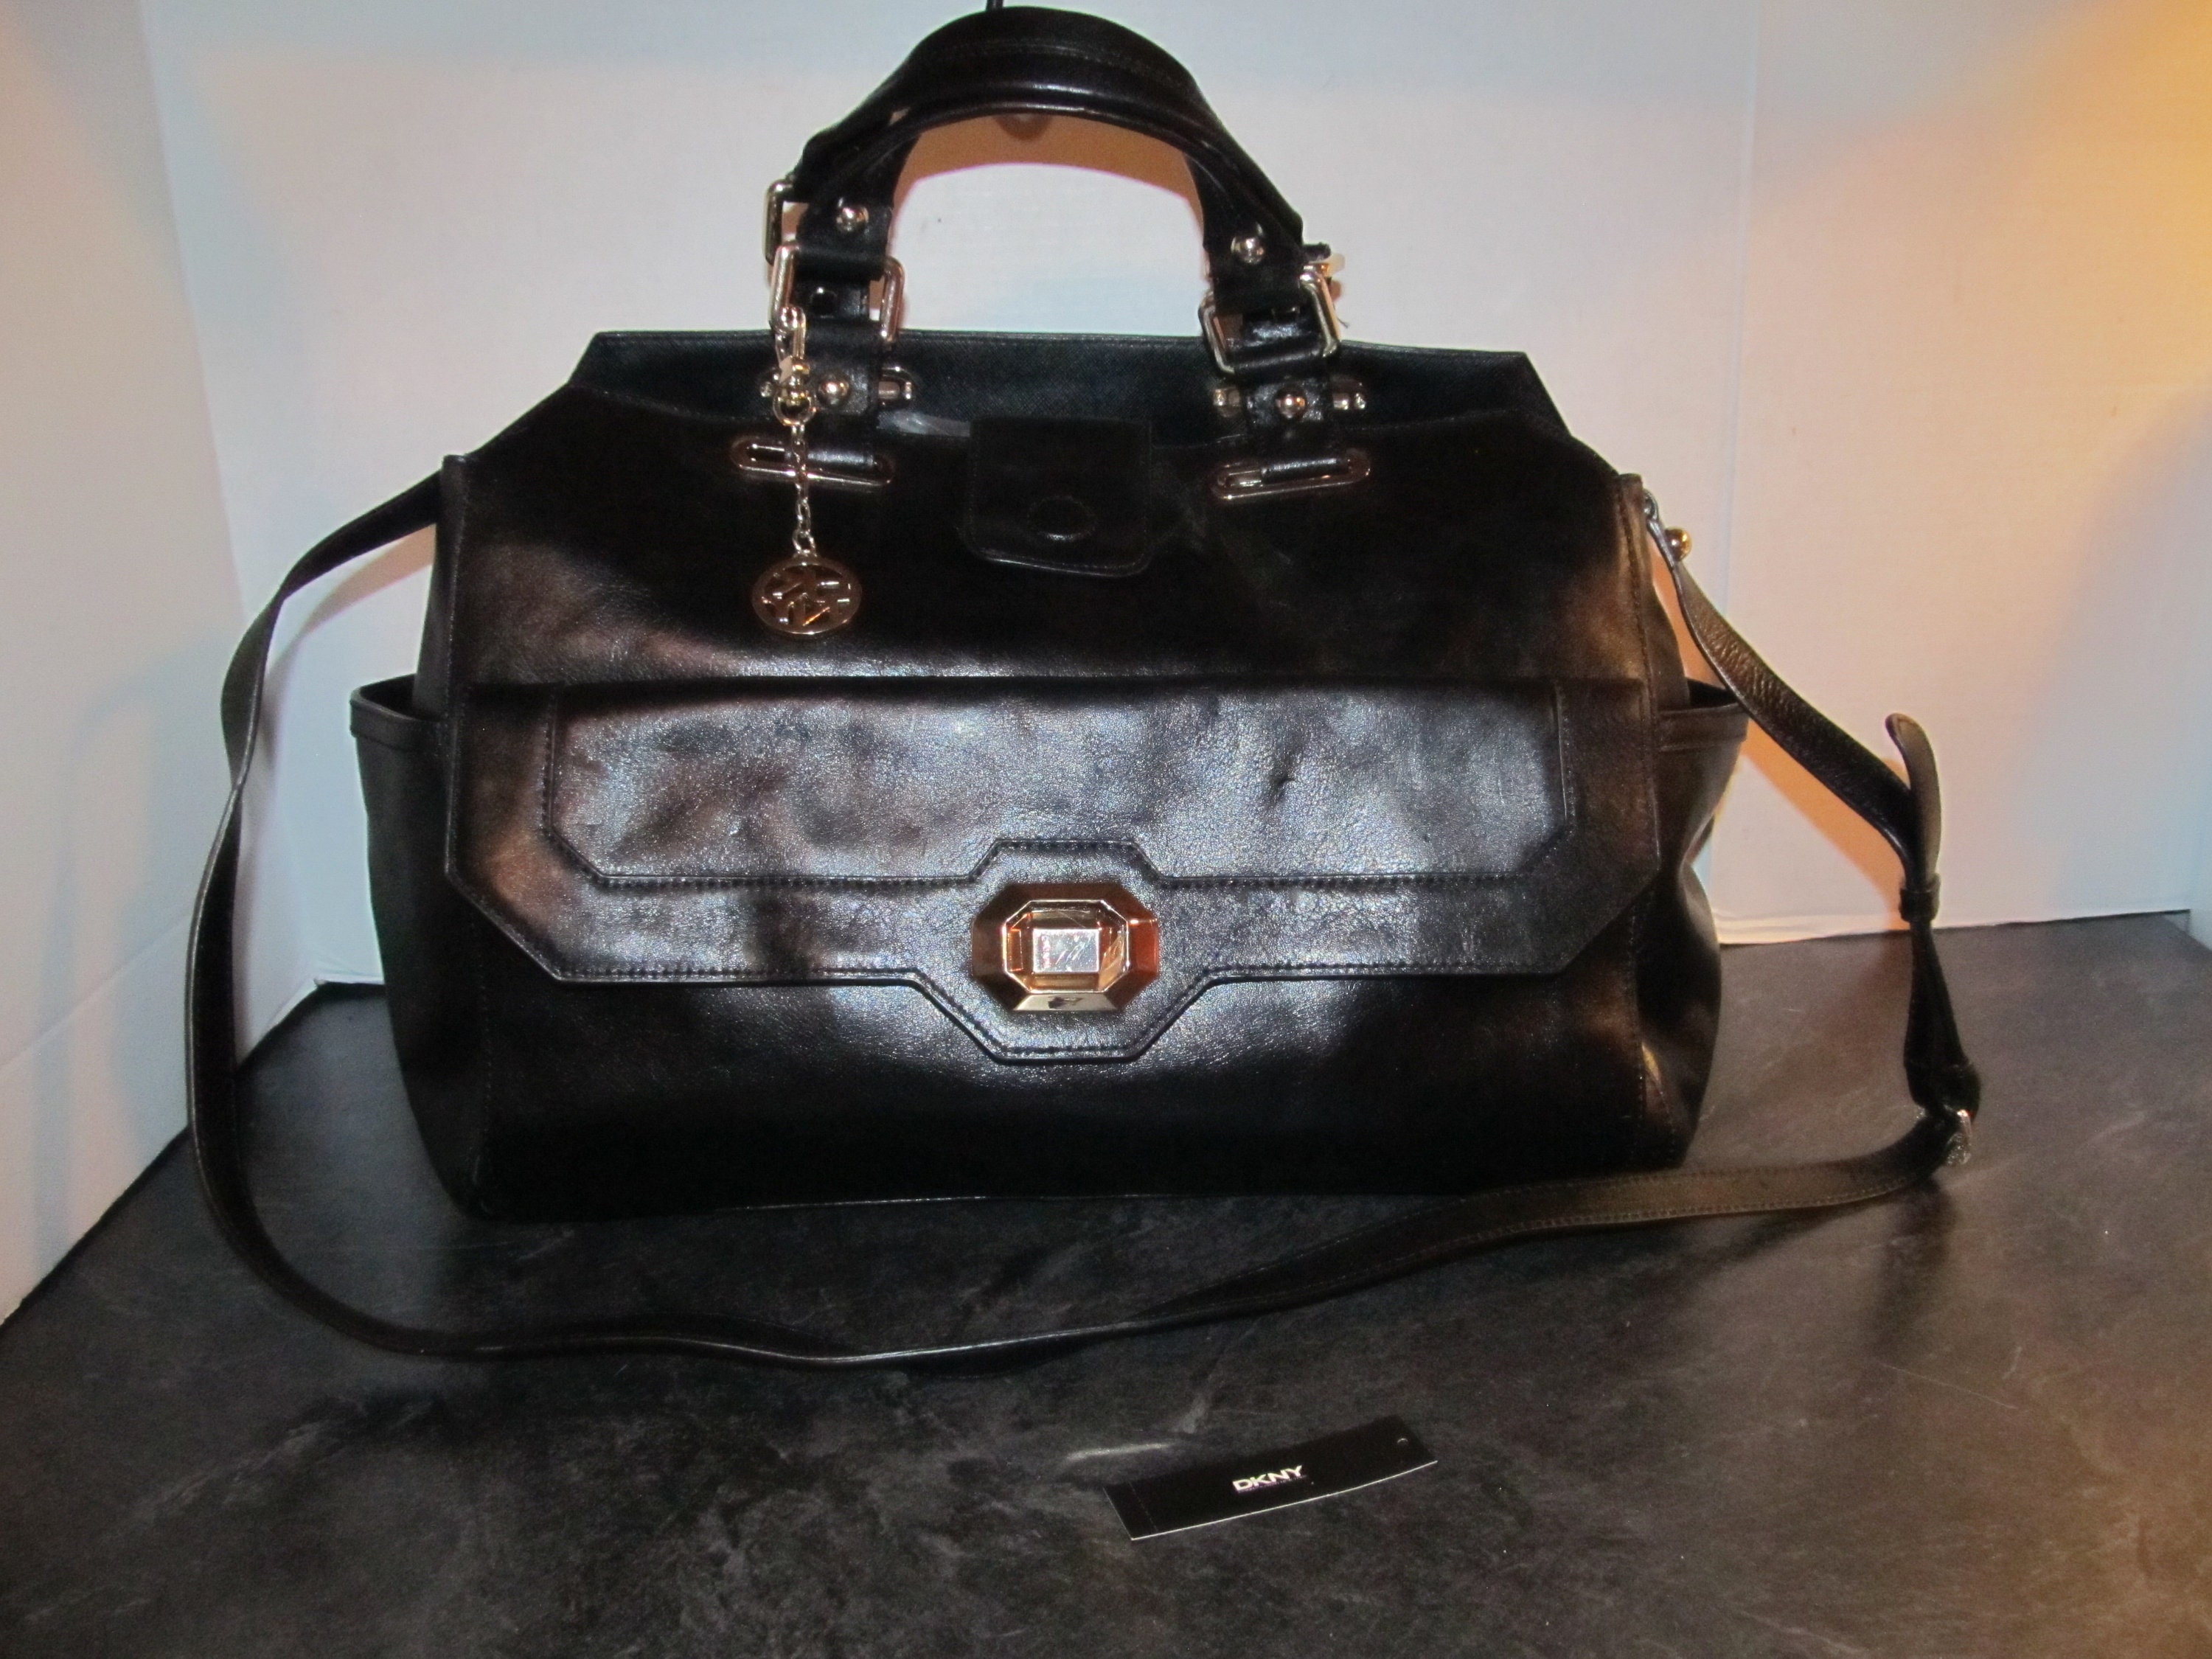 Buy DKNY Bryant Zip Around Leather Purse from the Next UK online shop